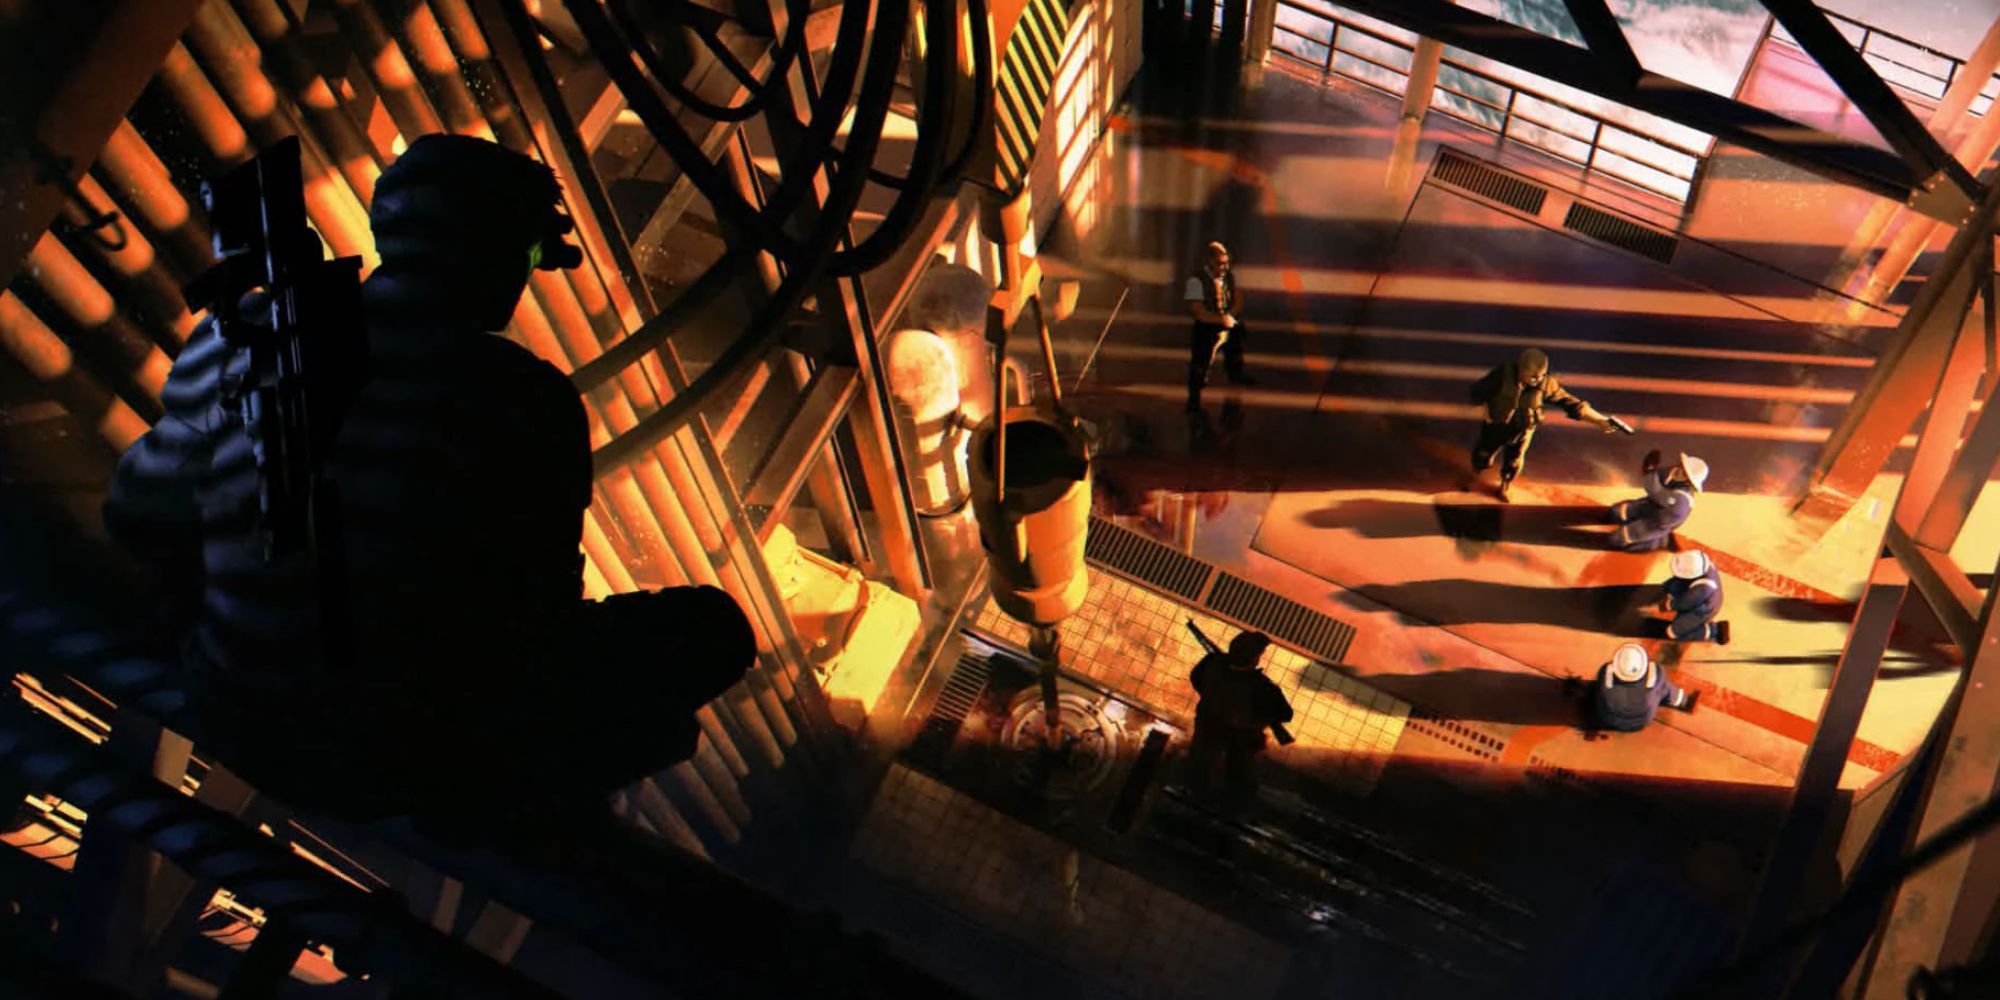 splinter cell remake first concept art Sam Fisher suspended above a lobby with hostages below